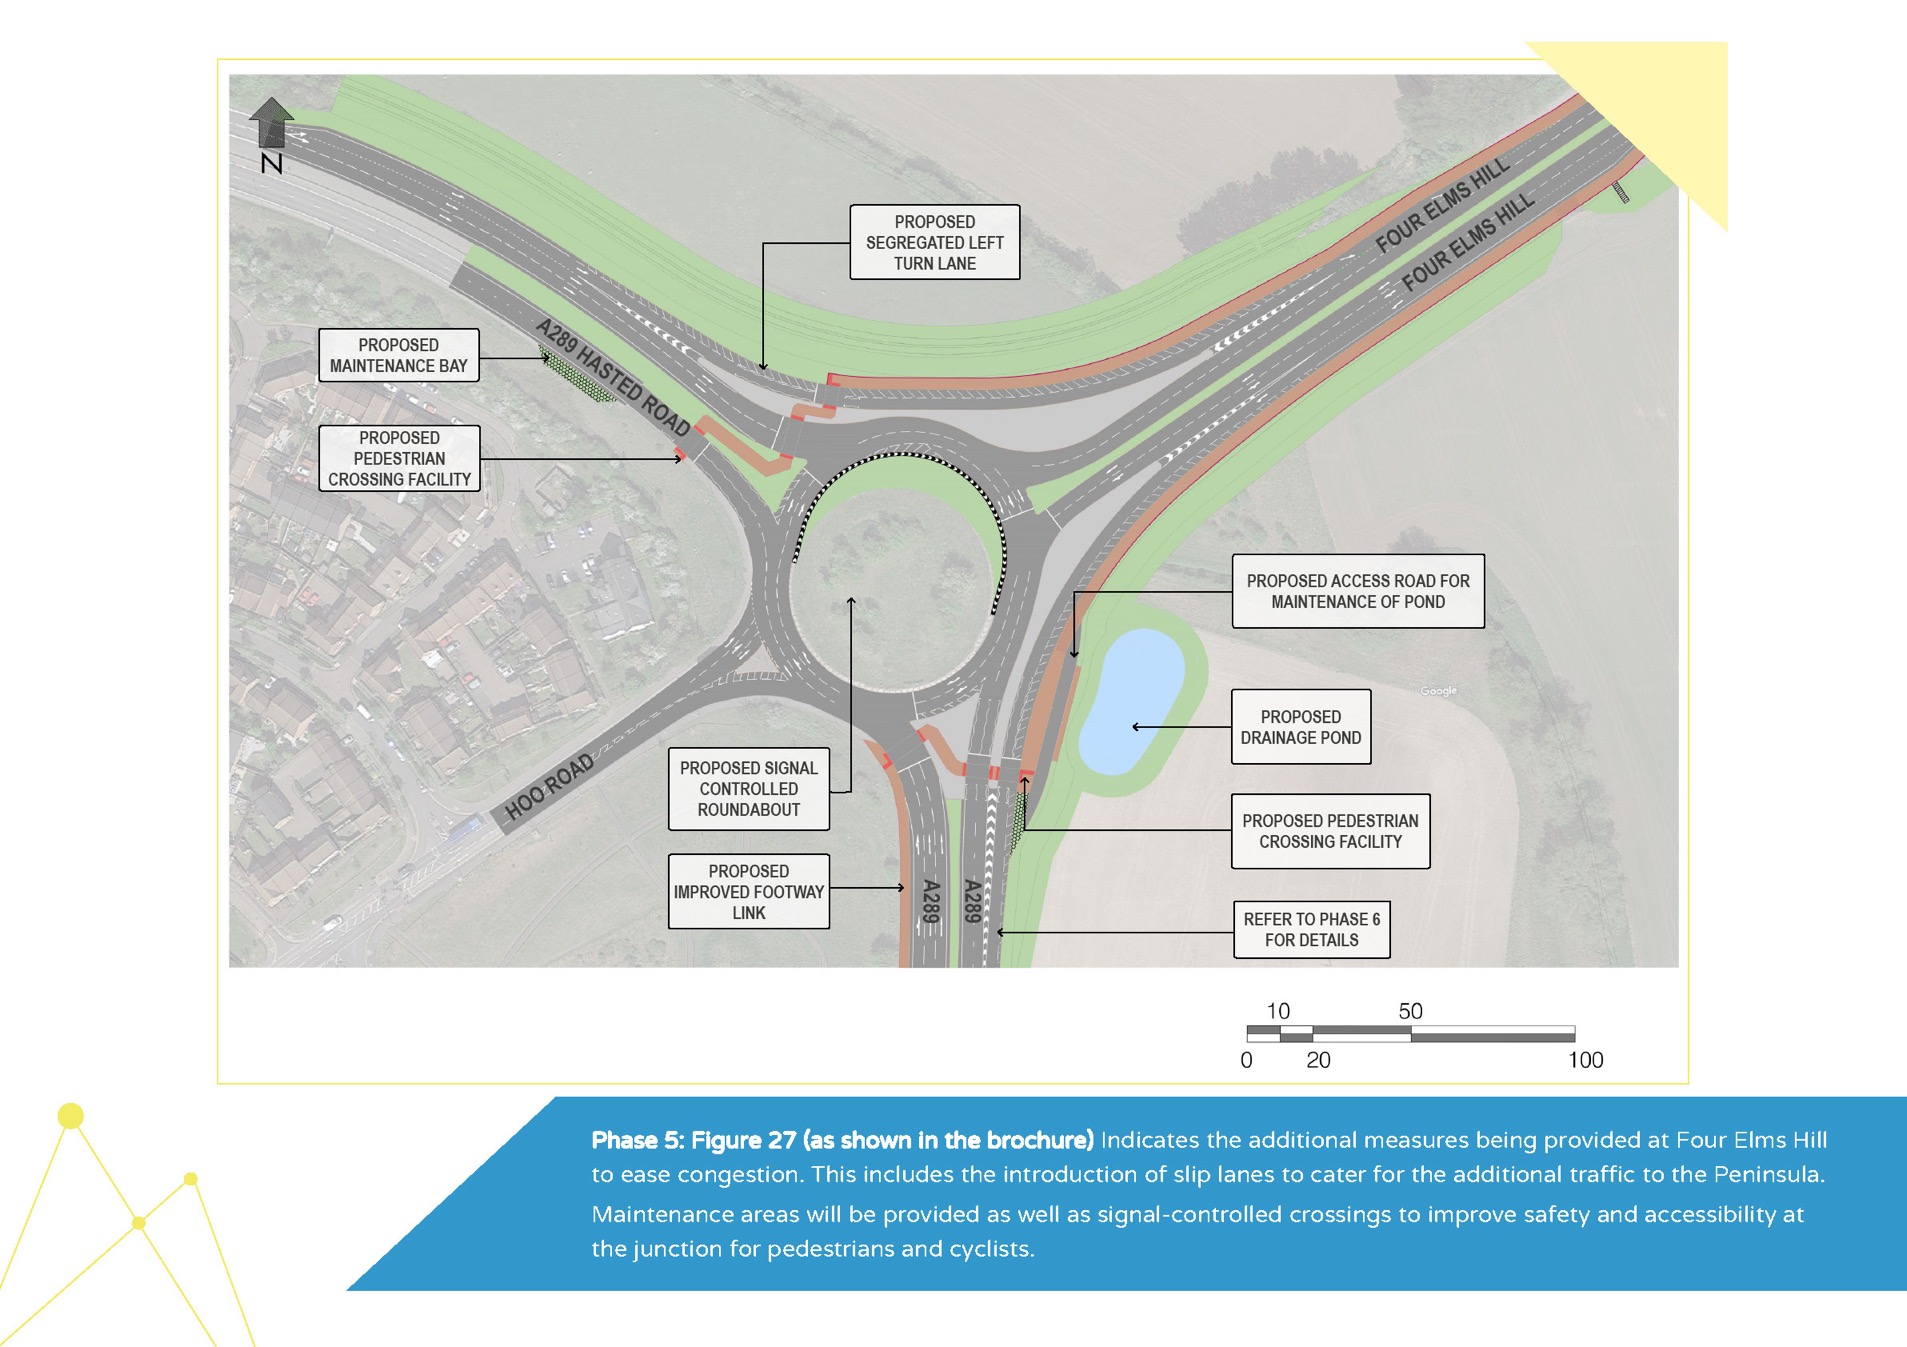 The additional measures being provided at Four Elms Hill to ease congestion